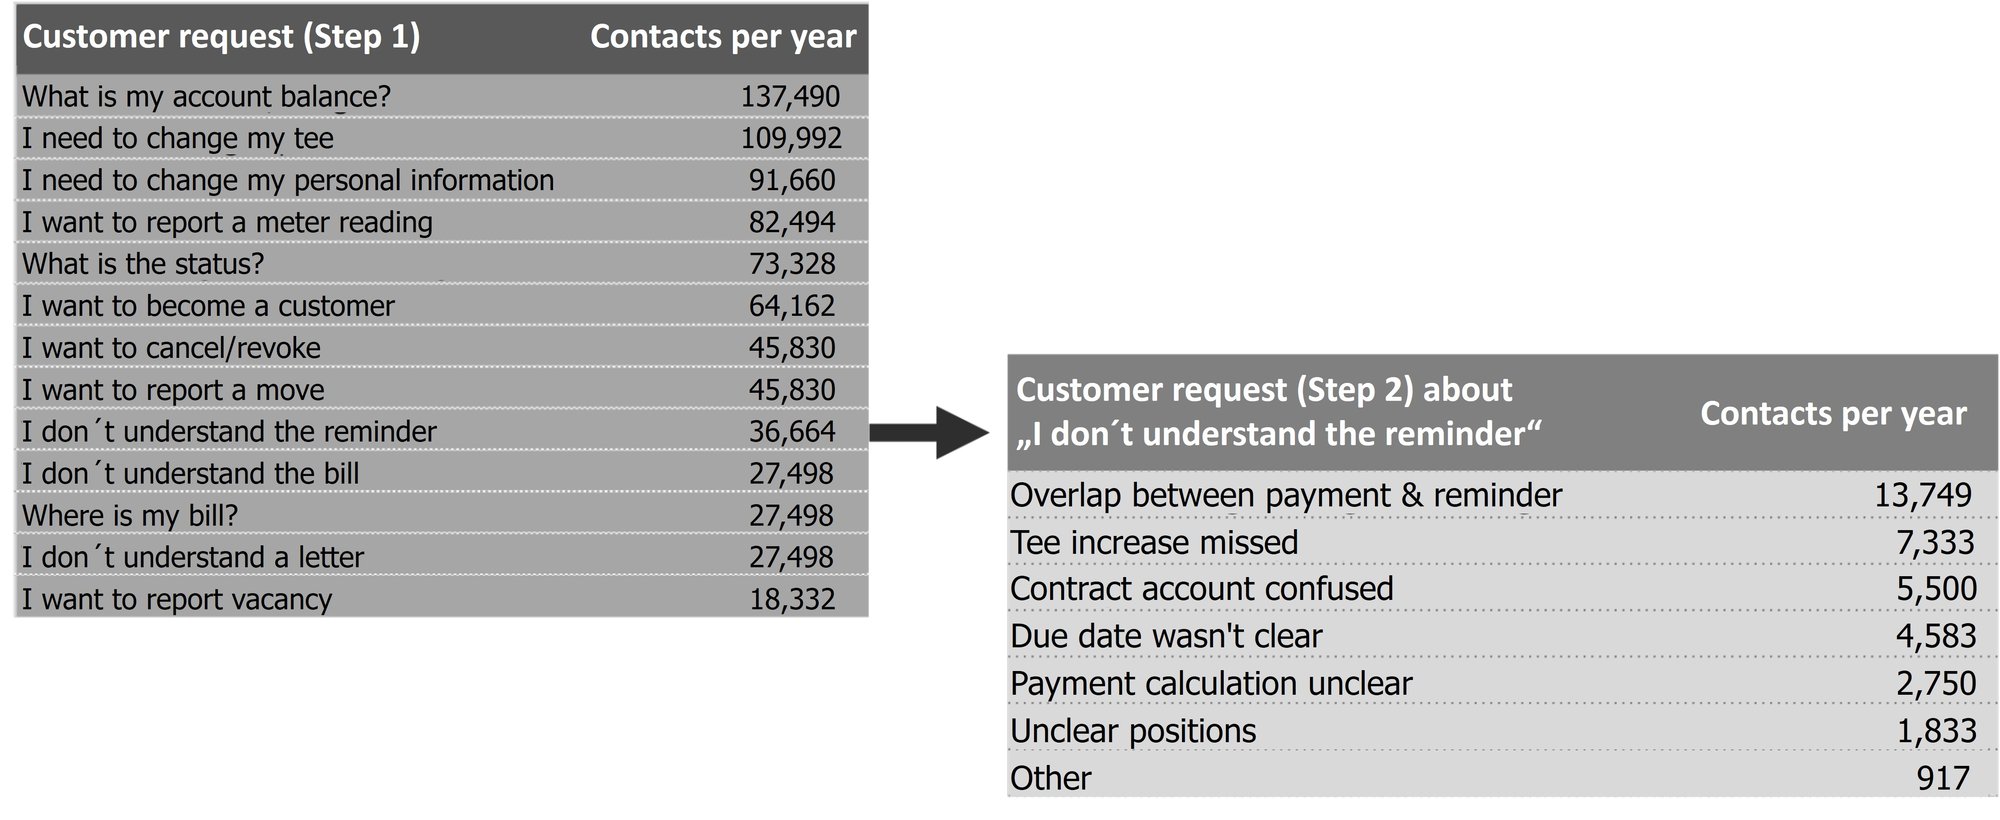 Illustration of the contact reasons in customer language and from the customer's perspective with the respective information on 'Contacts per year'. First on the 1st level; below this, e.g. "I don't understand the reminder". Next to it, the 2nd level for this contact reason: overlap between payment & reminder, tee increase, contract account confused...(and others, each with the figures for contacts/year)